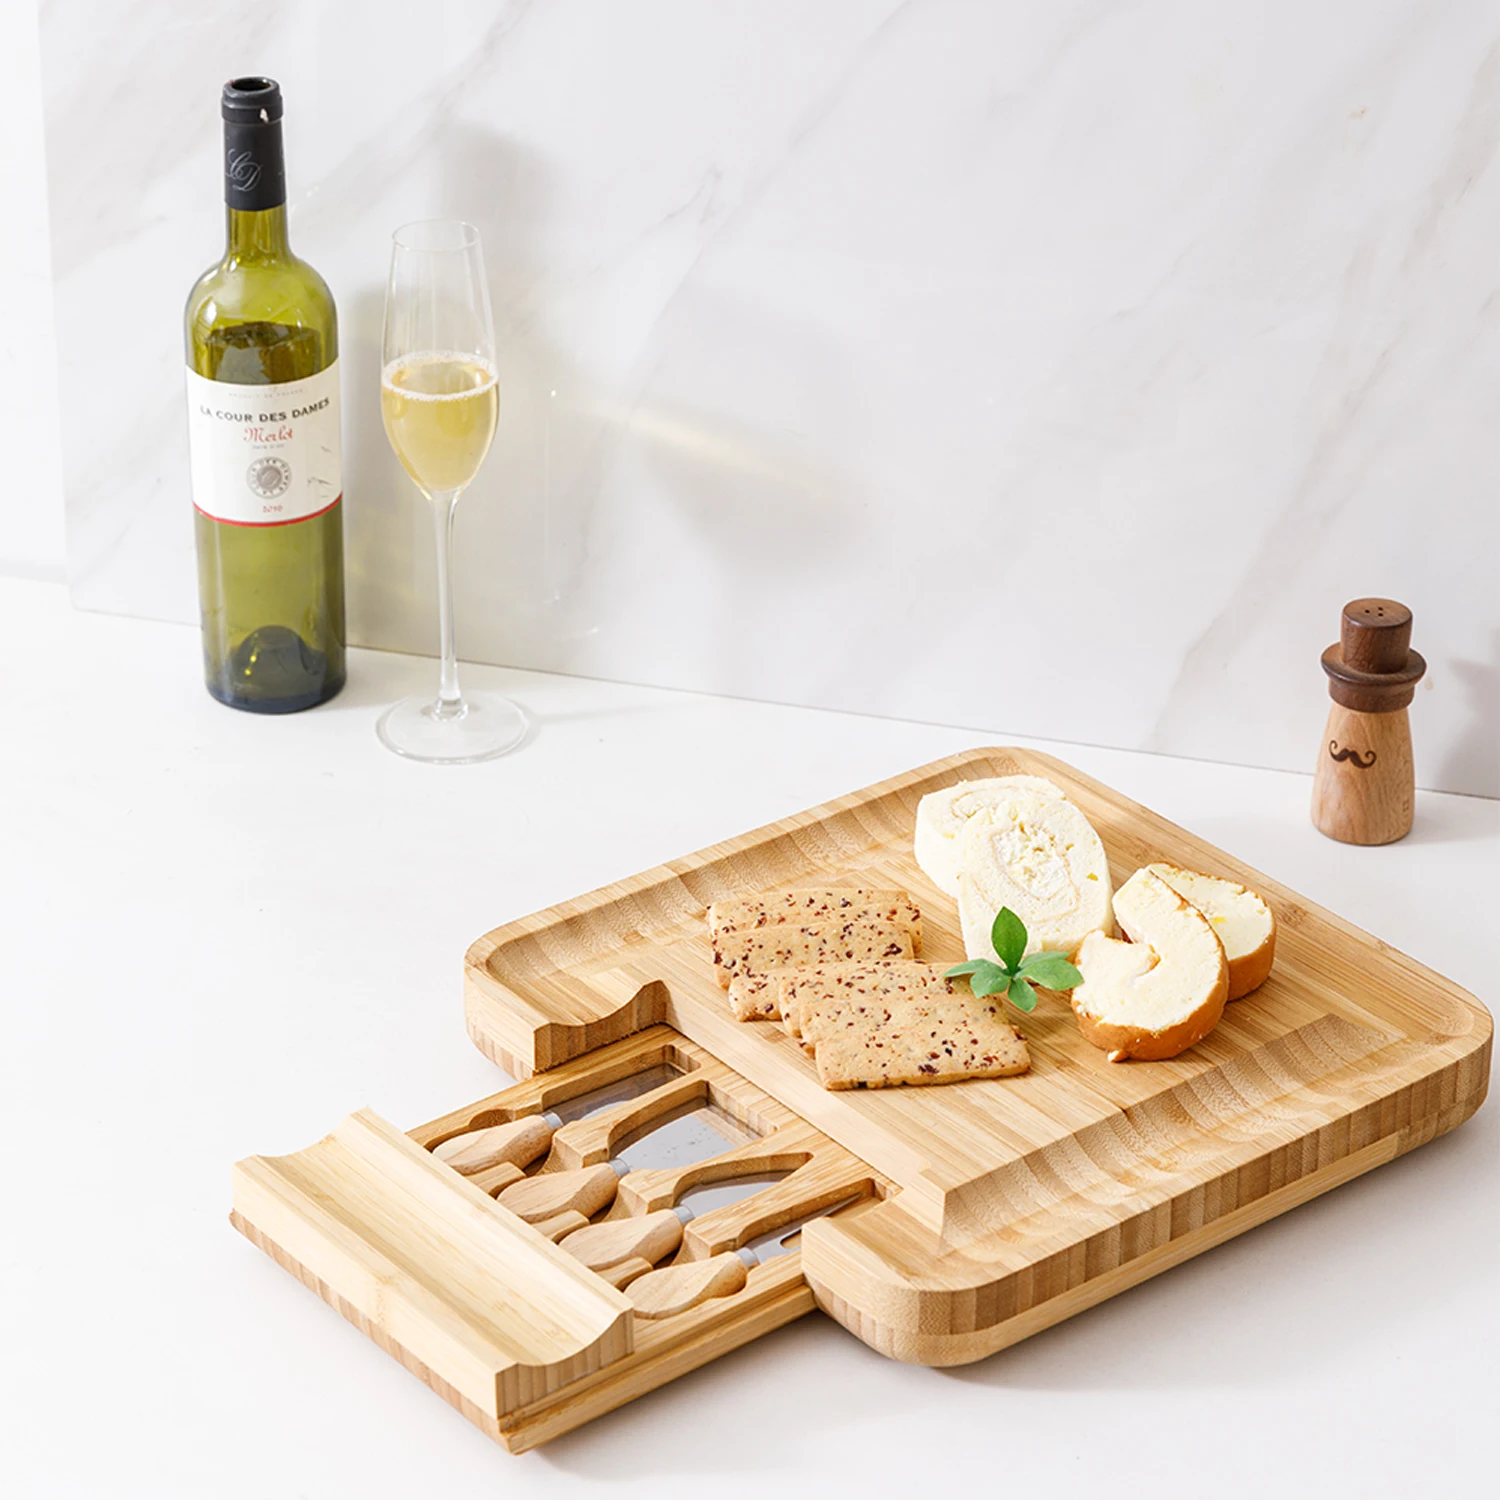 

Bamboo Cheese Board and Knife Set Wood Charcuterie Platter and Serving Meat Cheese Board with Slide-Out Drawer for Cutlery, Natural bamboo color